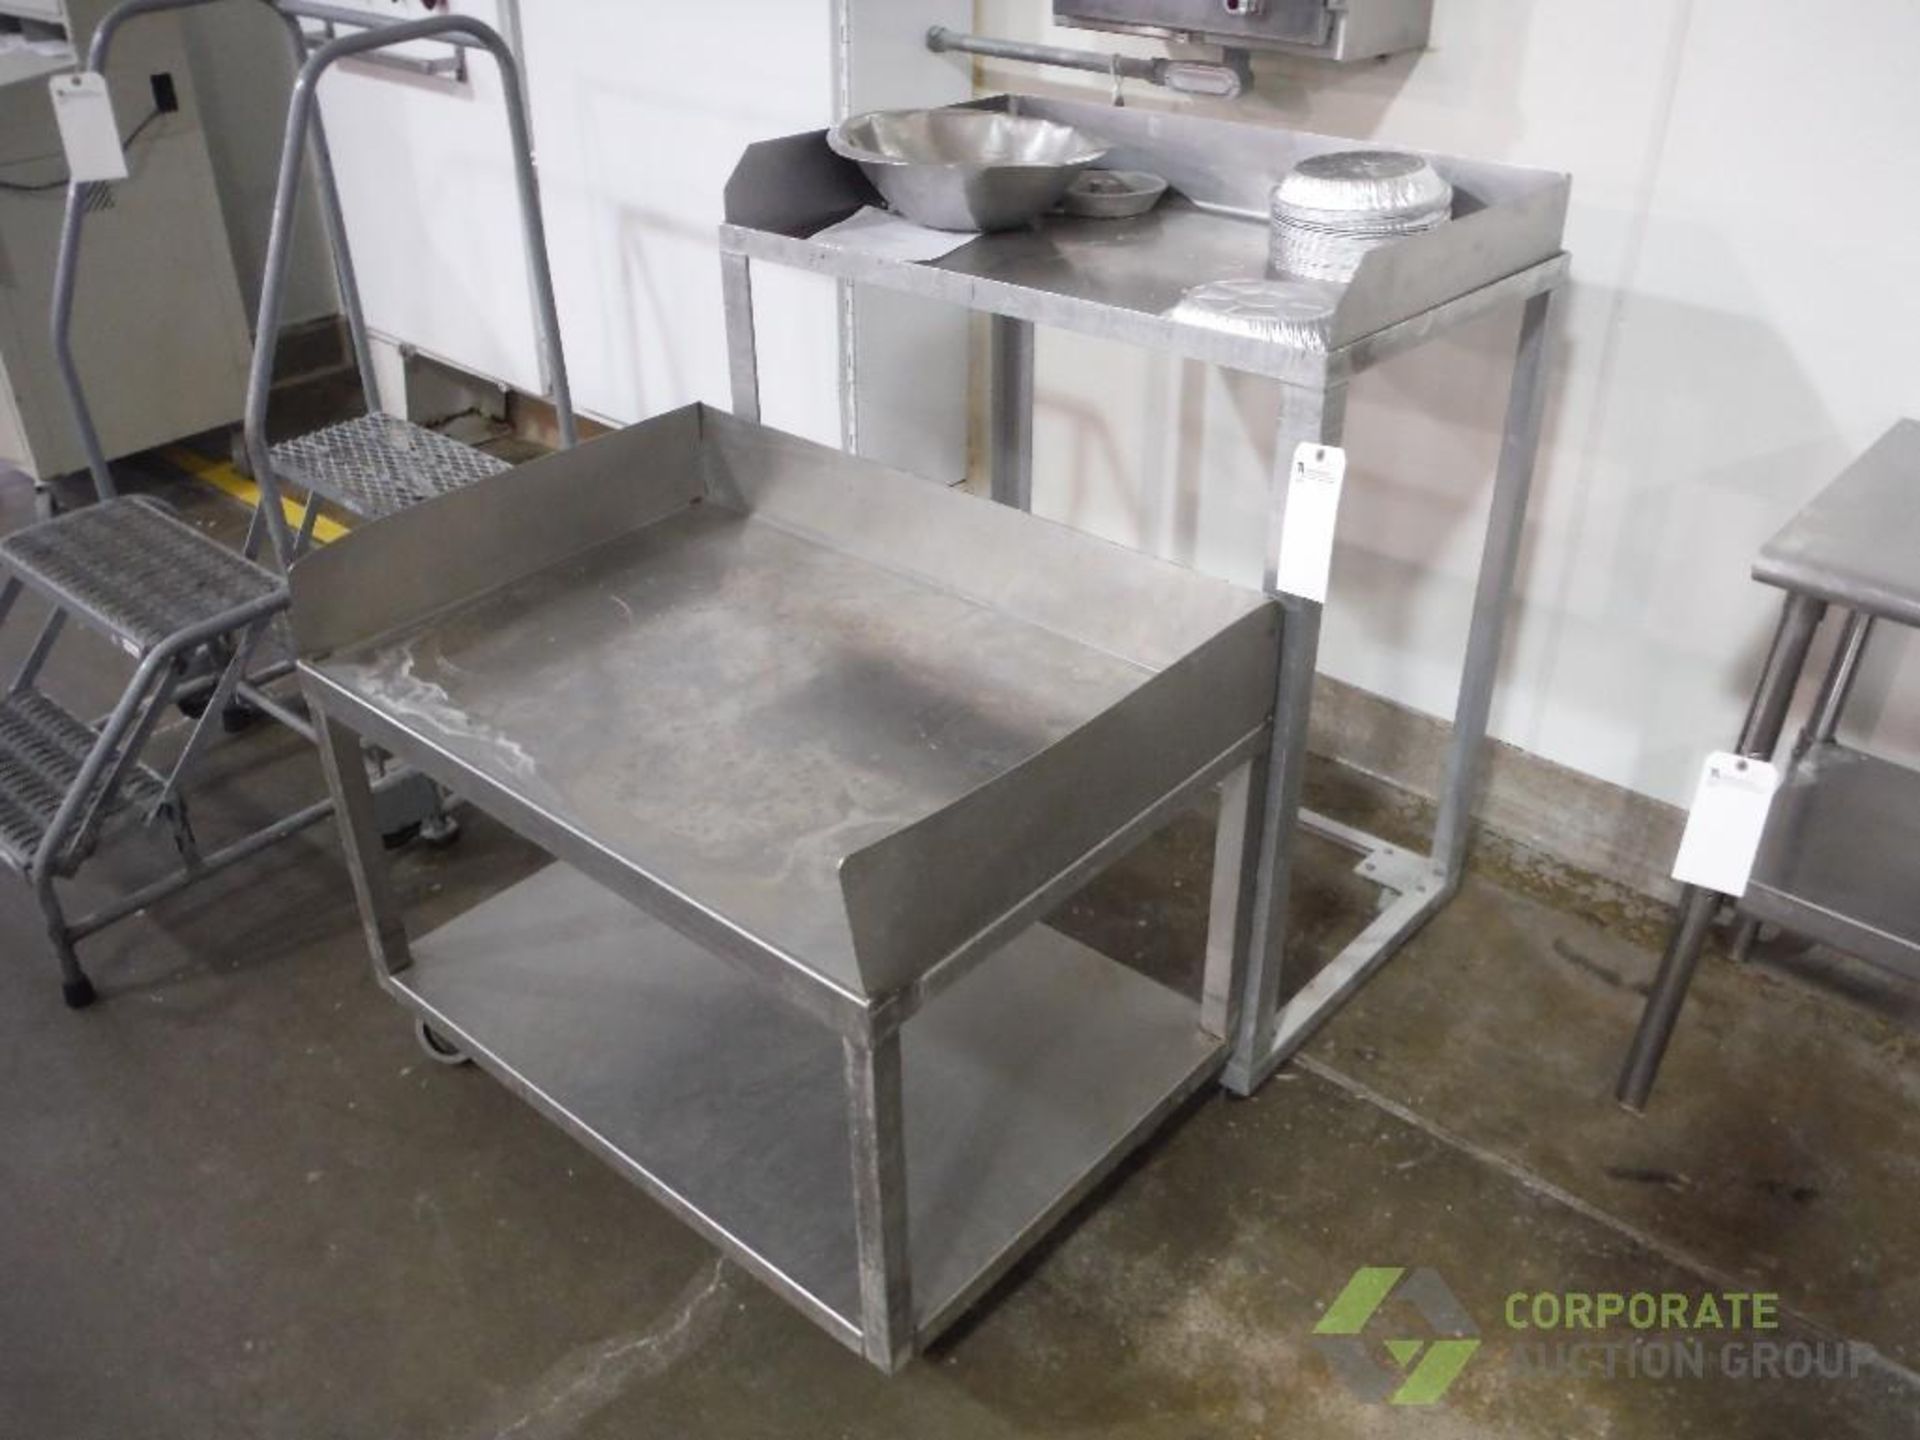 (2) SS work stations, on casters (LOT)